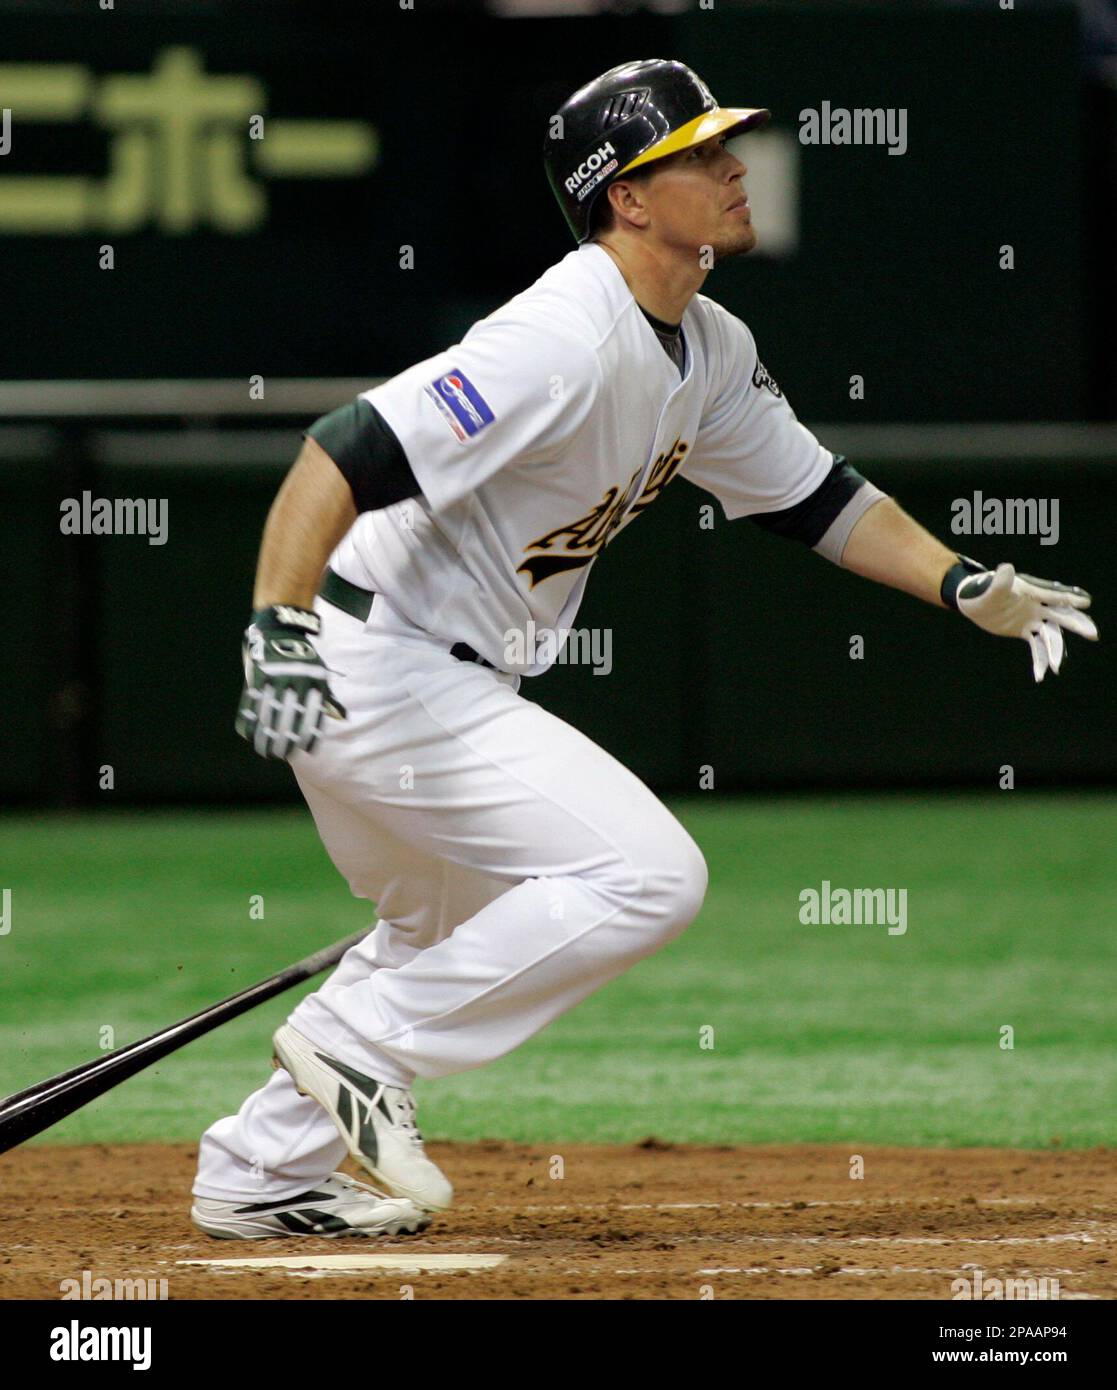 Oakland Athletics utilityman Donnie Murphy heads to first base after hitting a grand slam off Hanshin Tigers Jeff Williams in the eighth inning of their exhibition baseball game at Tokyo Dome in